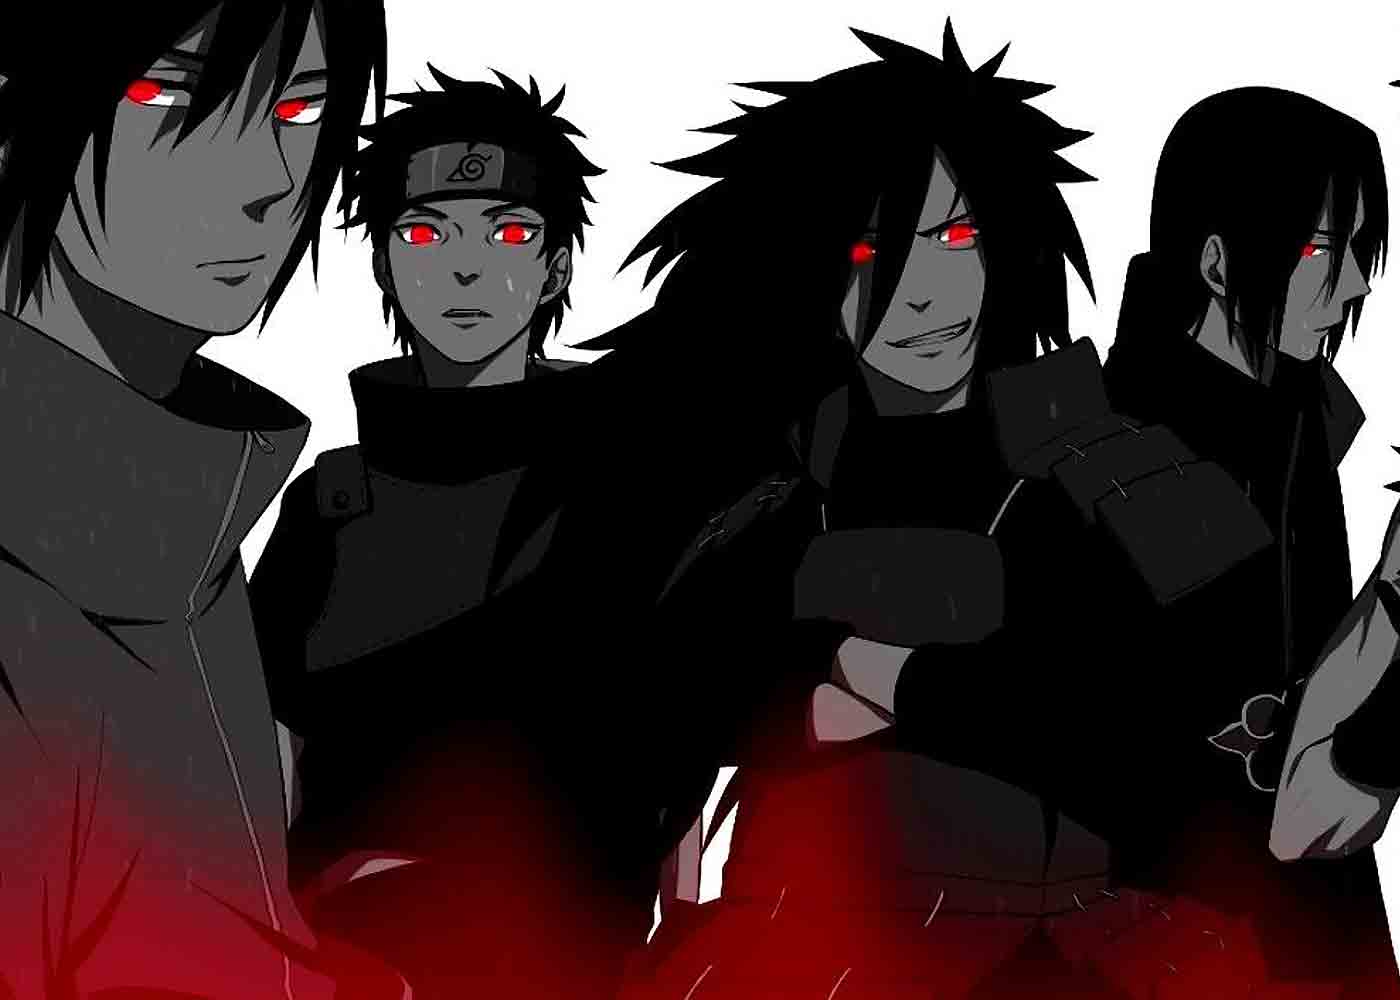 The 5 Strongest Clans in the Anime Naruto